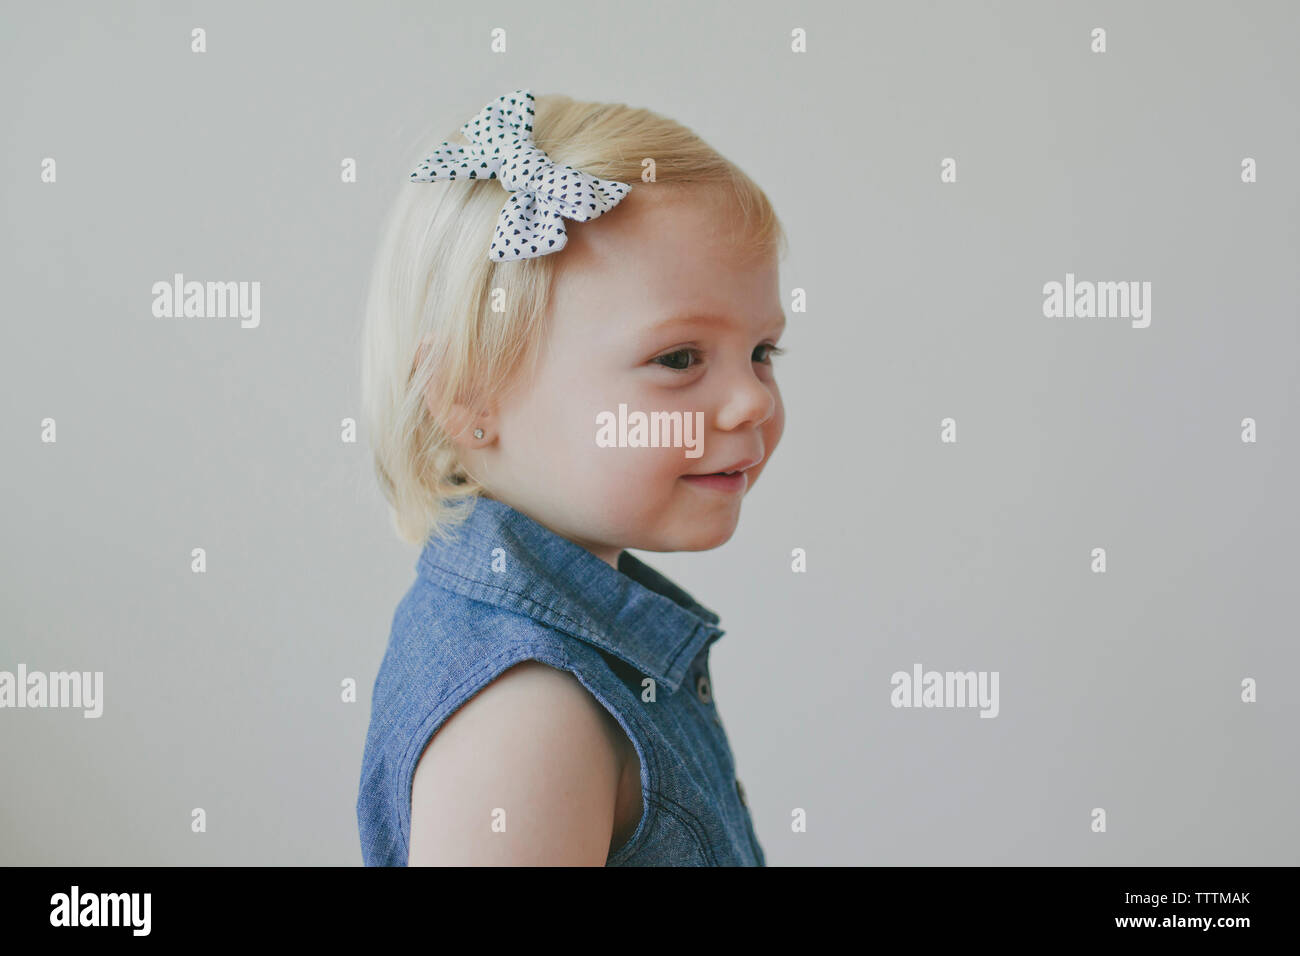 Side view of cute girl wearing bow on her hair against gray background Stock Photo